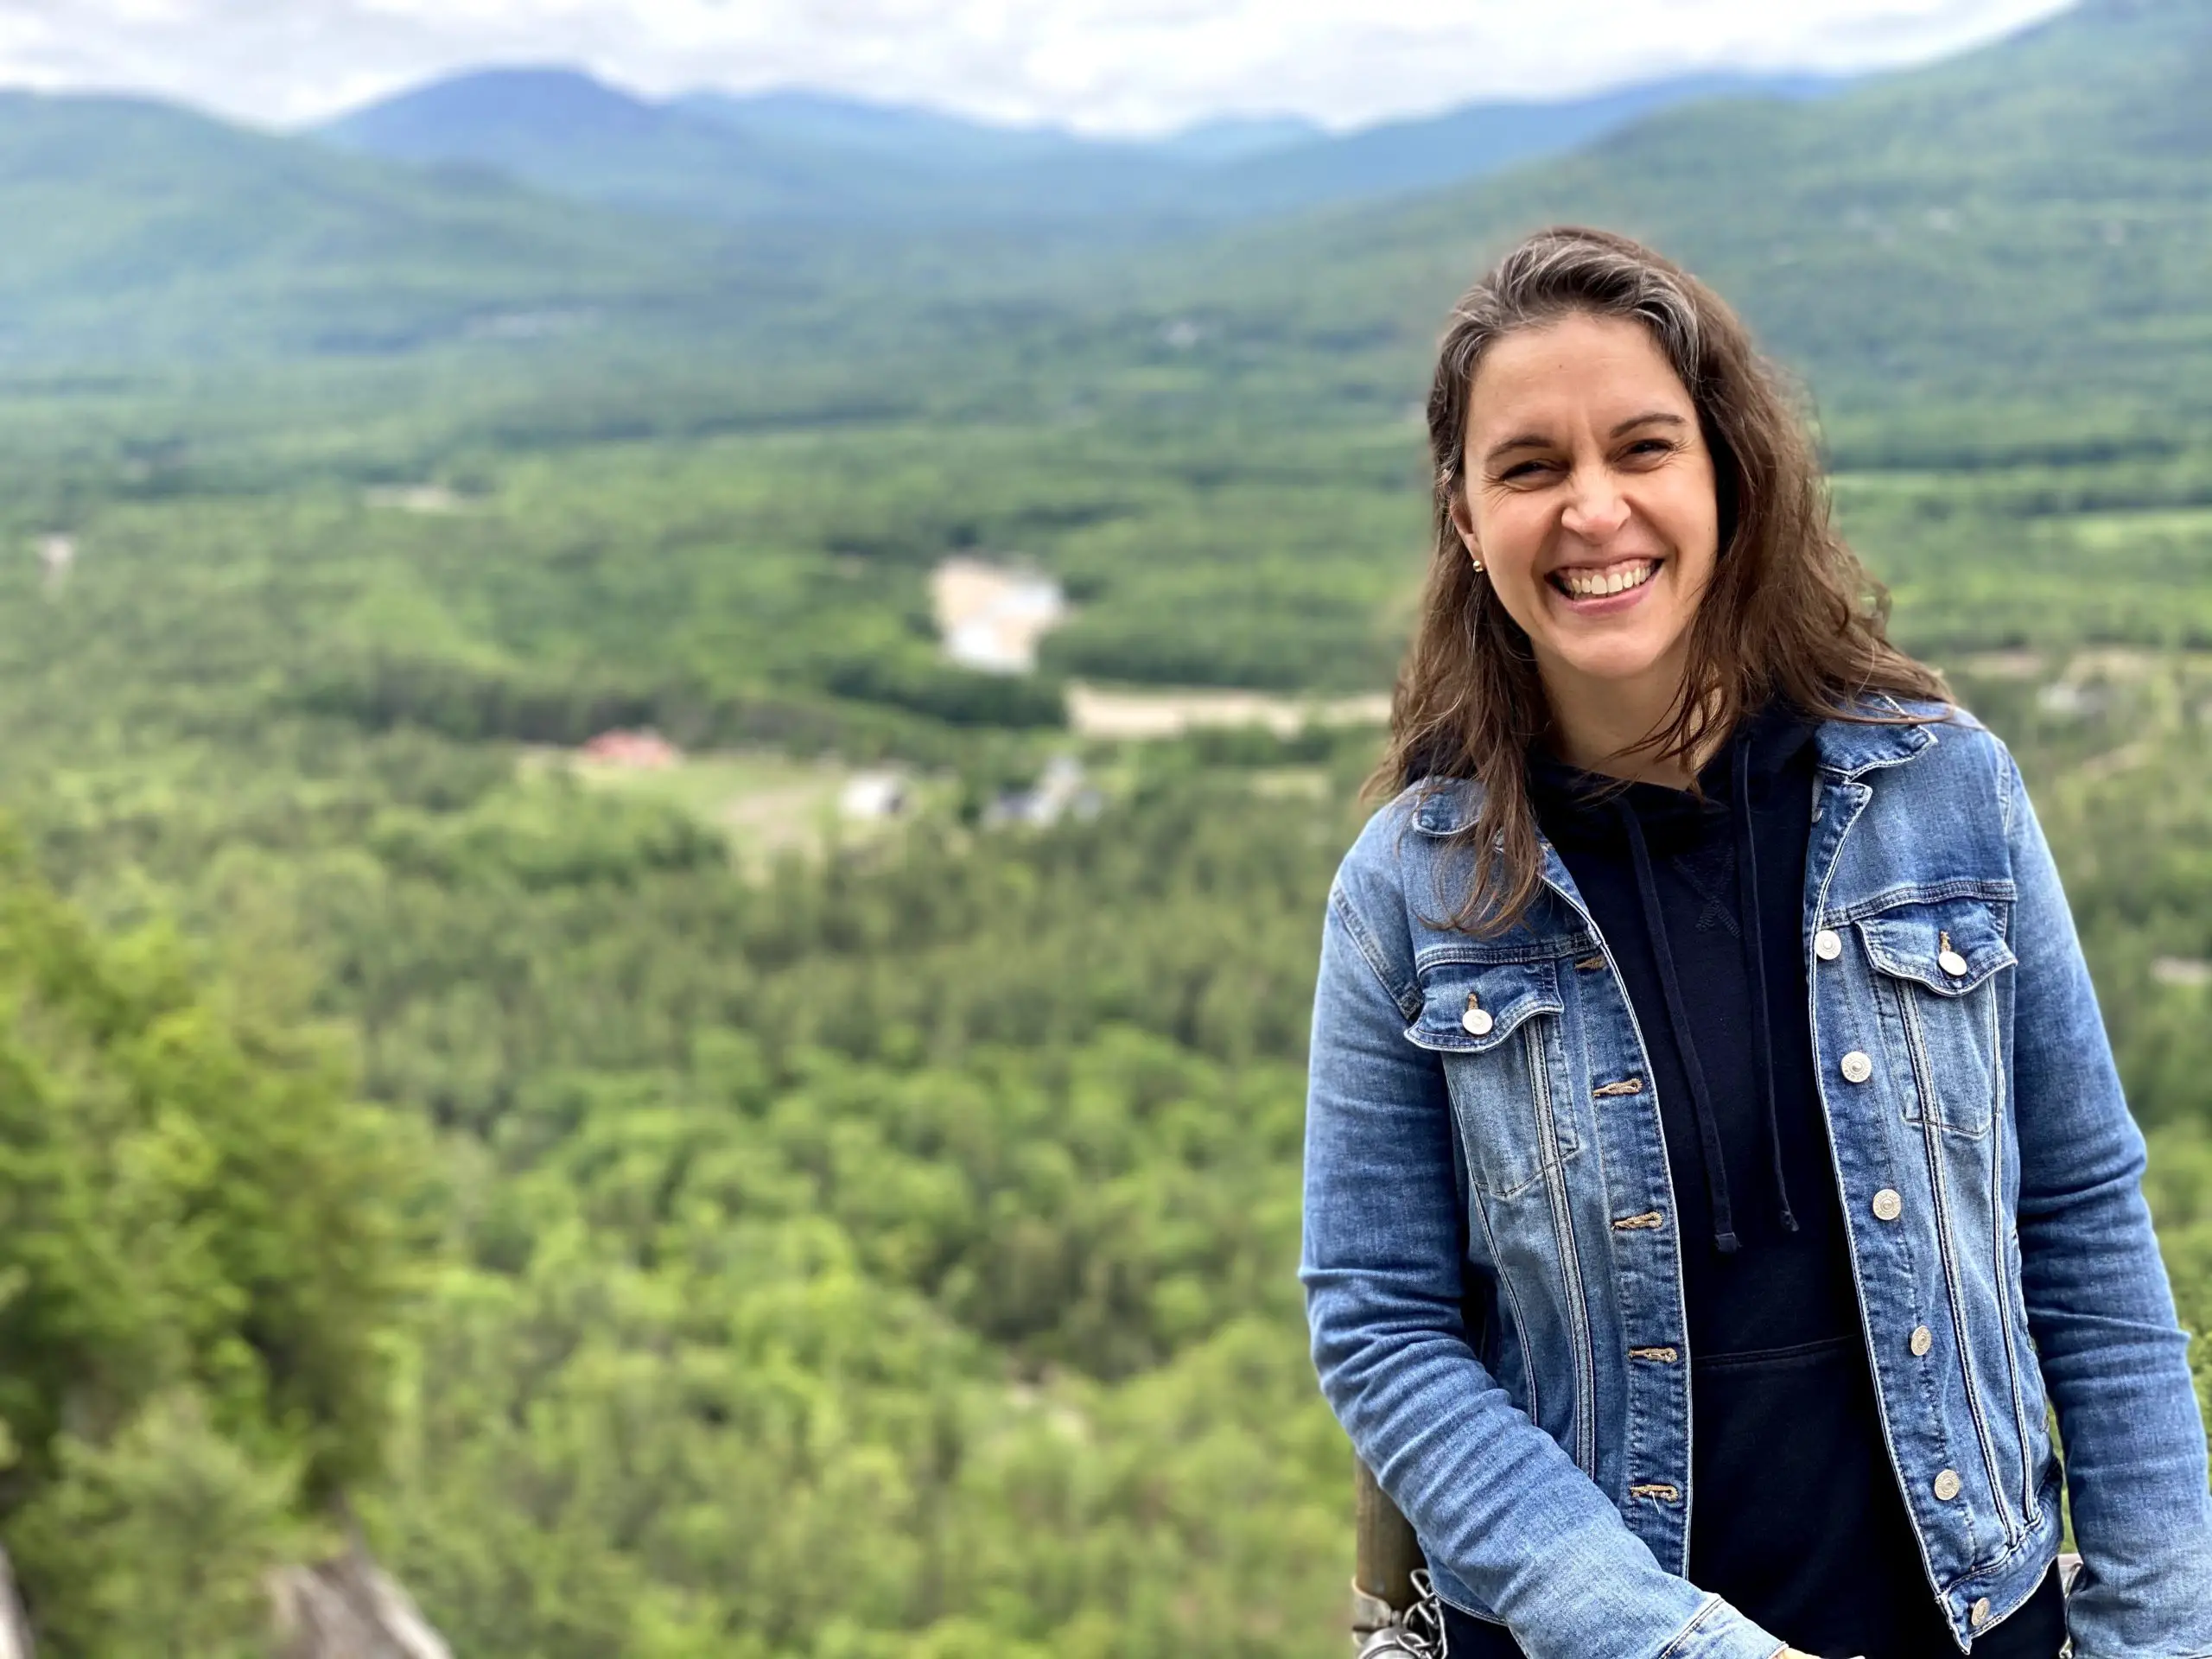 Kristen in front of a mountainous scene with green trees.